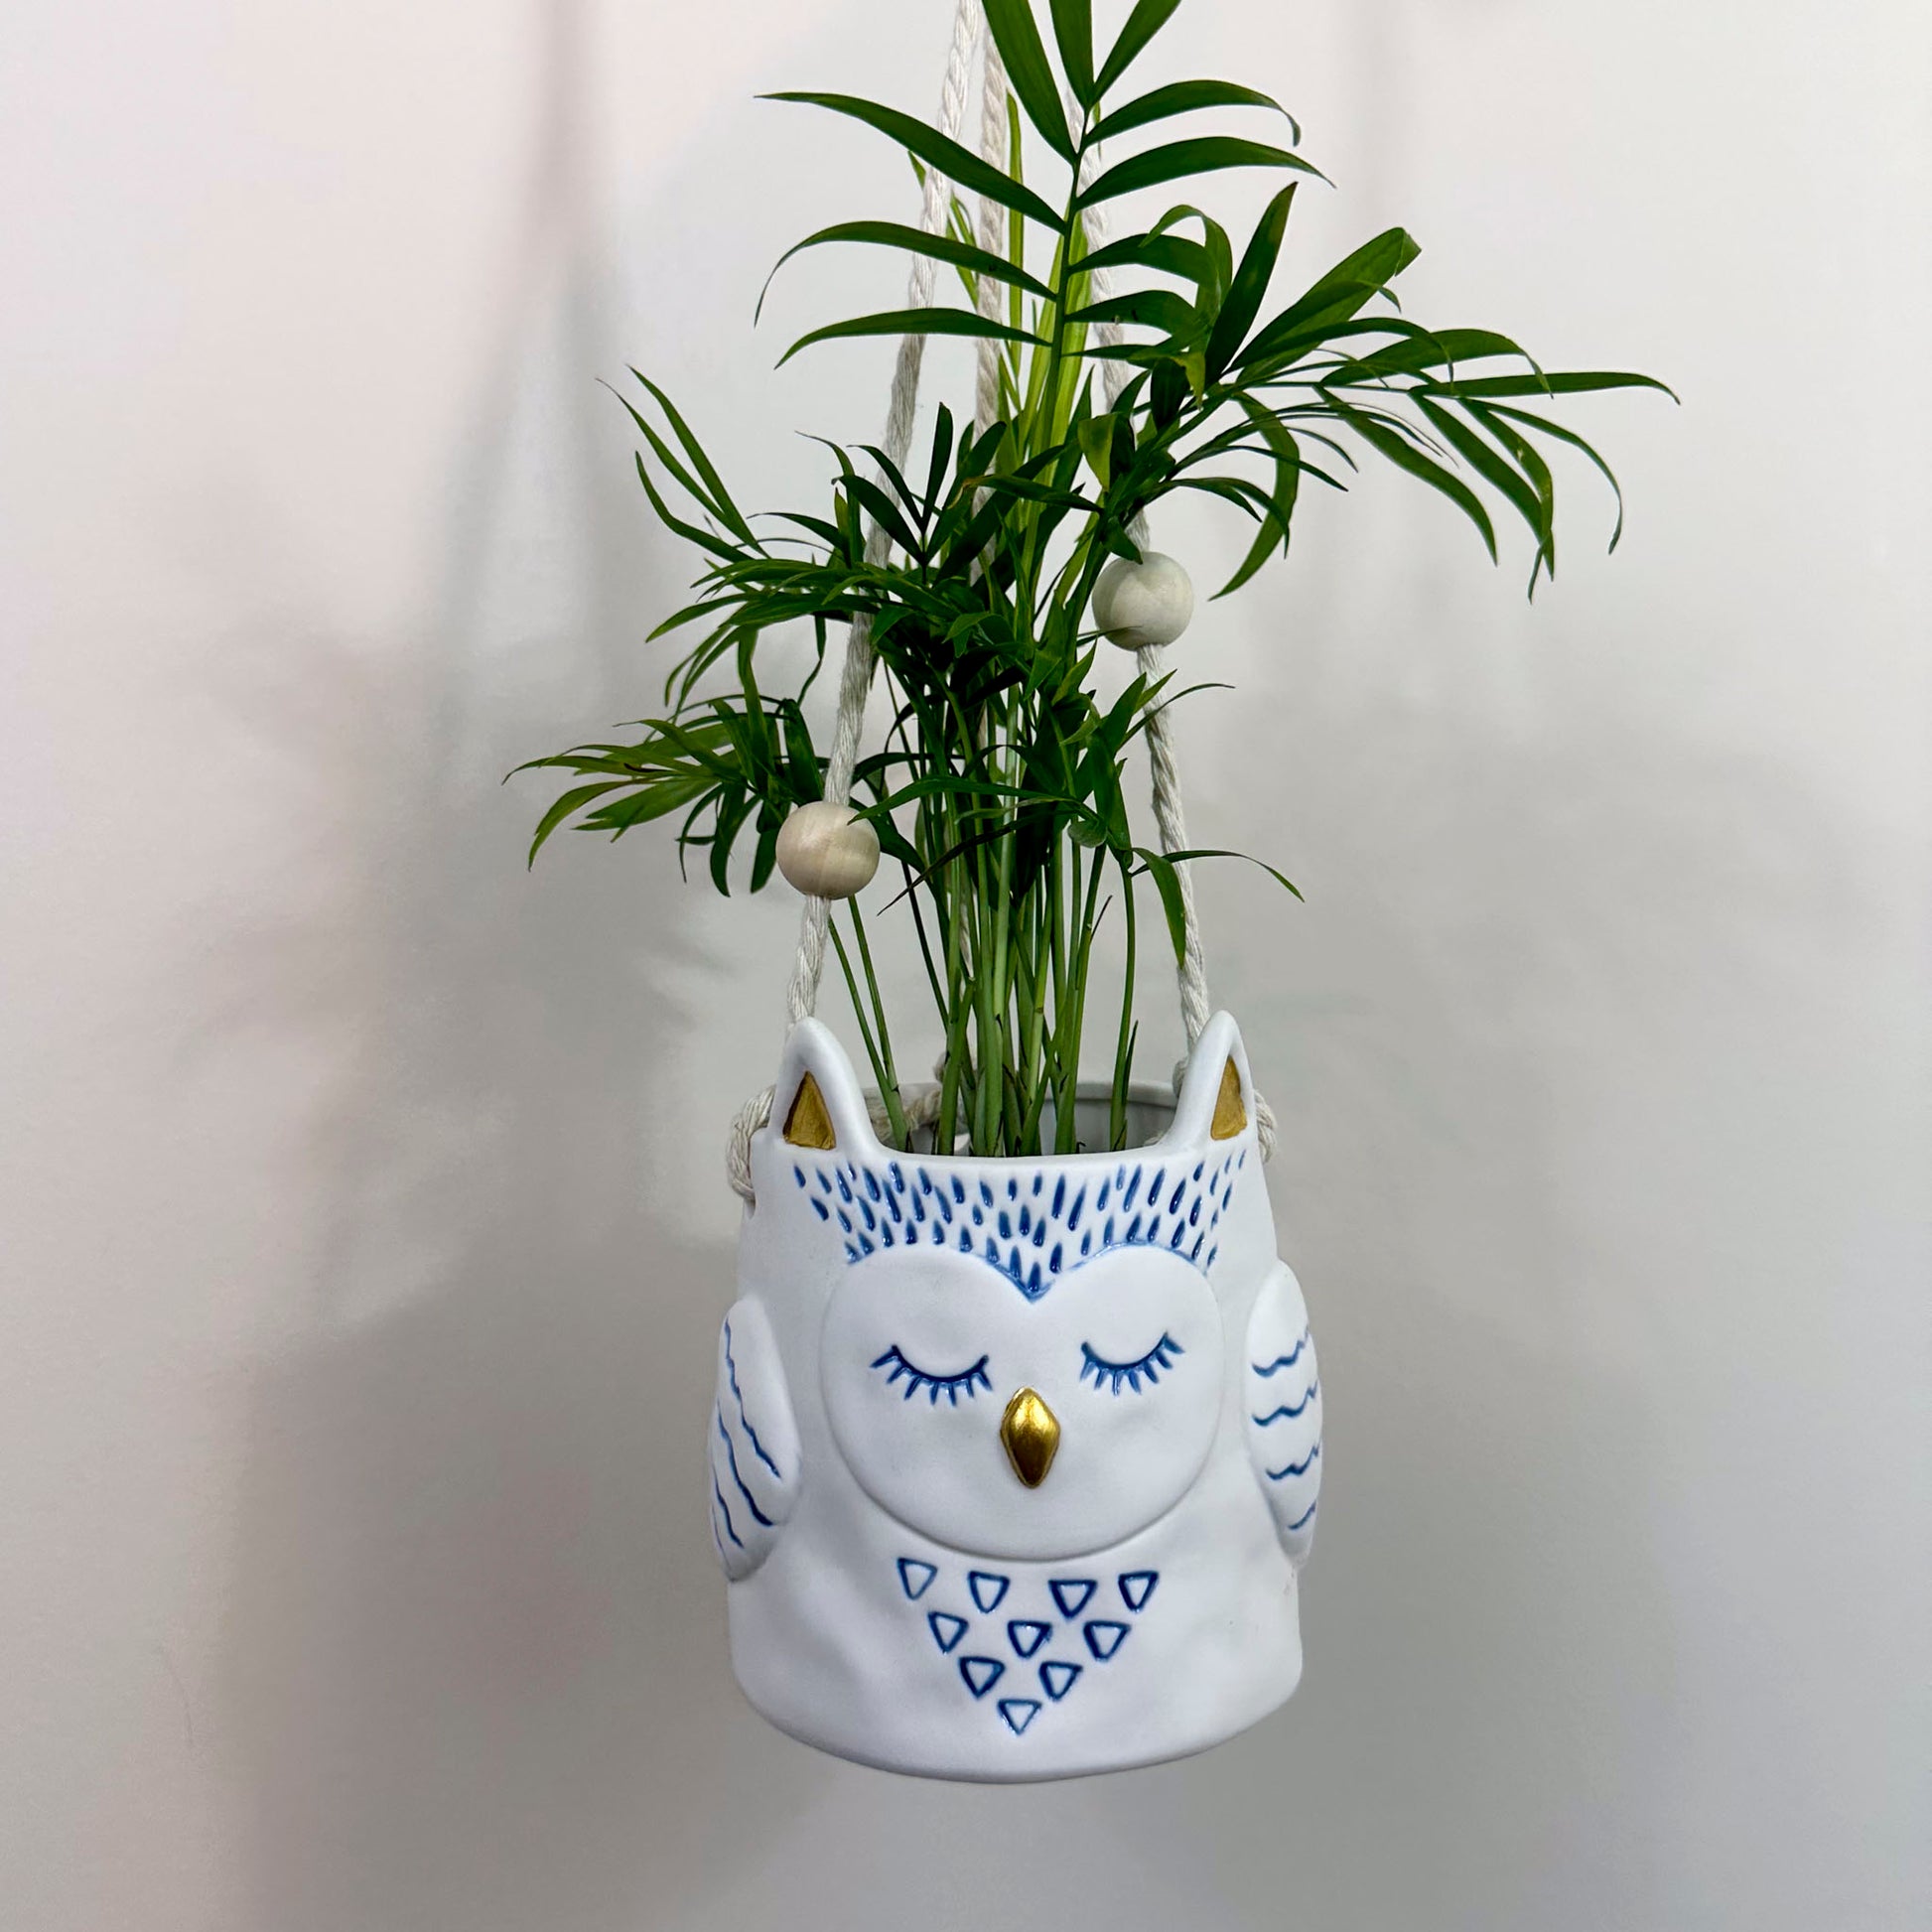 Hanging owl planter holding a palm